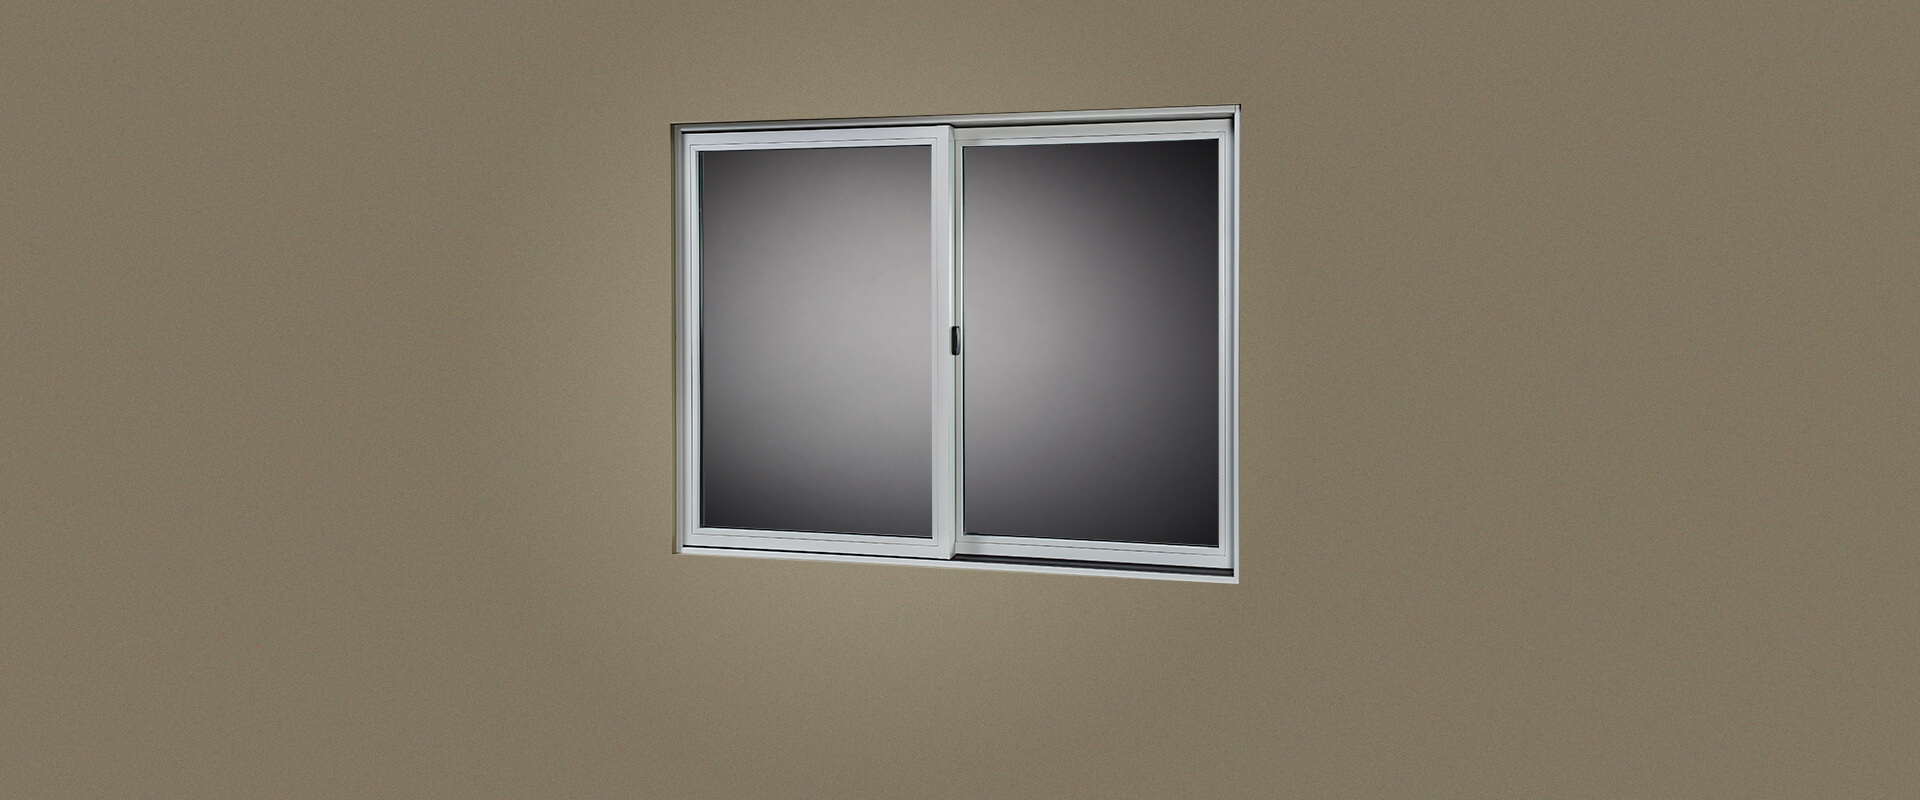 VistaLuxe Complementary double sliding window with Misty Gray interior.